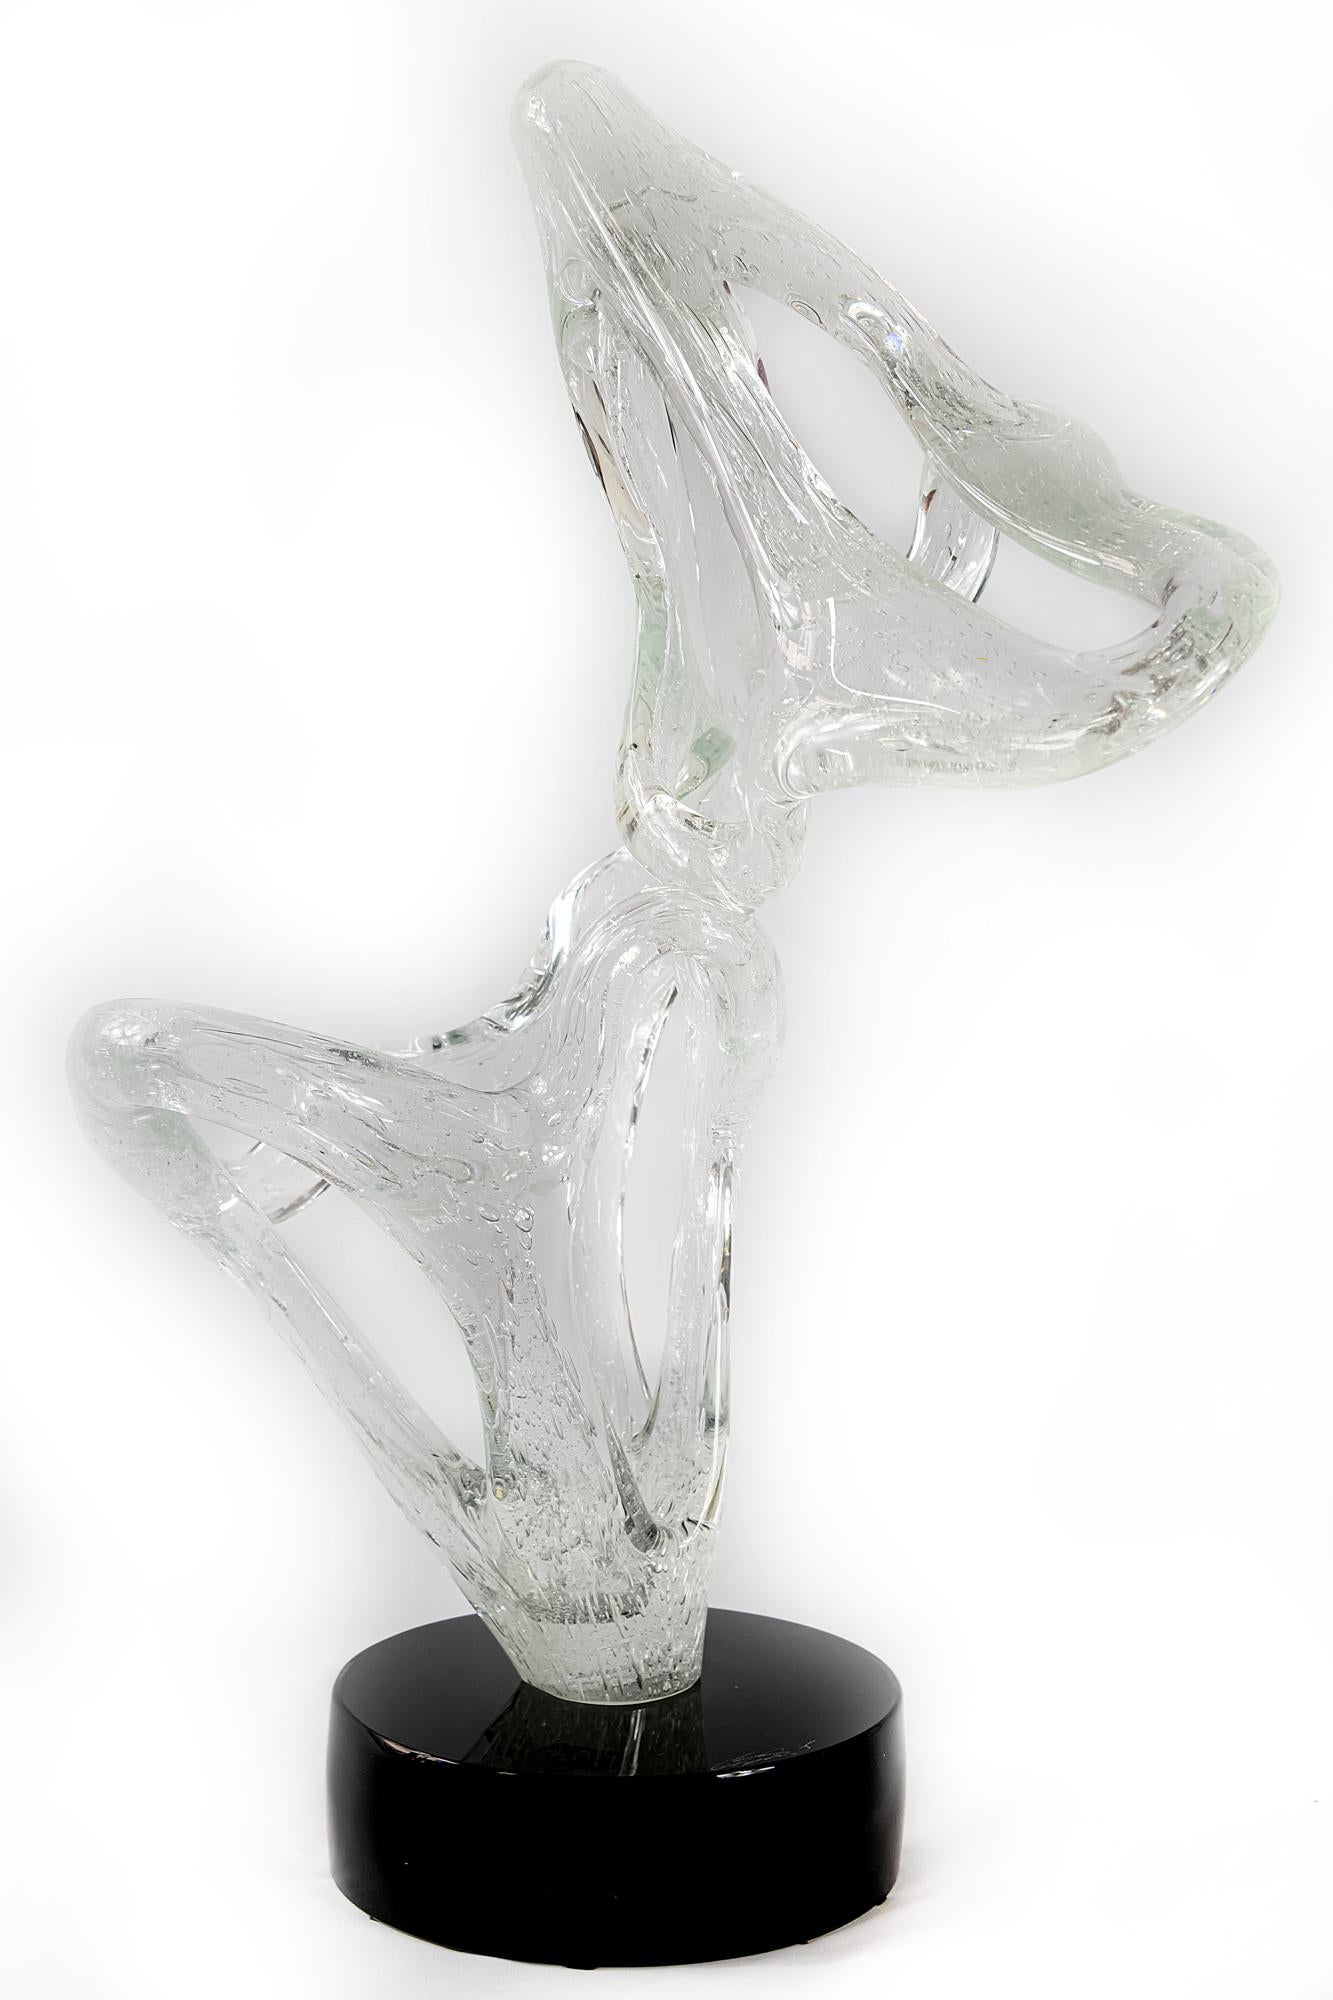 Italian handmade Murano glass abstract form sculpture. Signed Sergio Constantini.
The base is round black glass and the sculpture is transparent with bubbles inside blown glass.